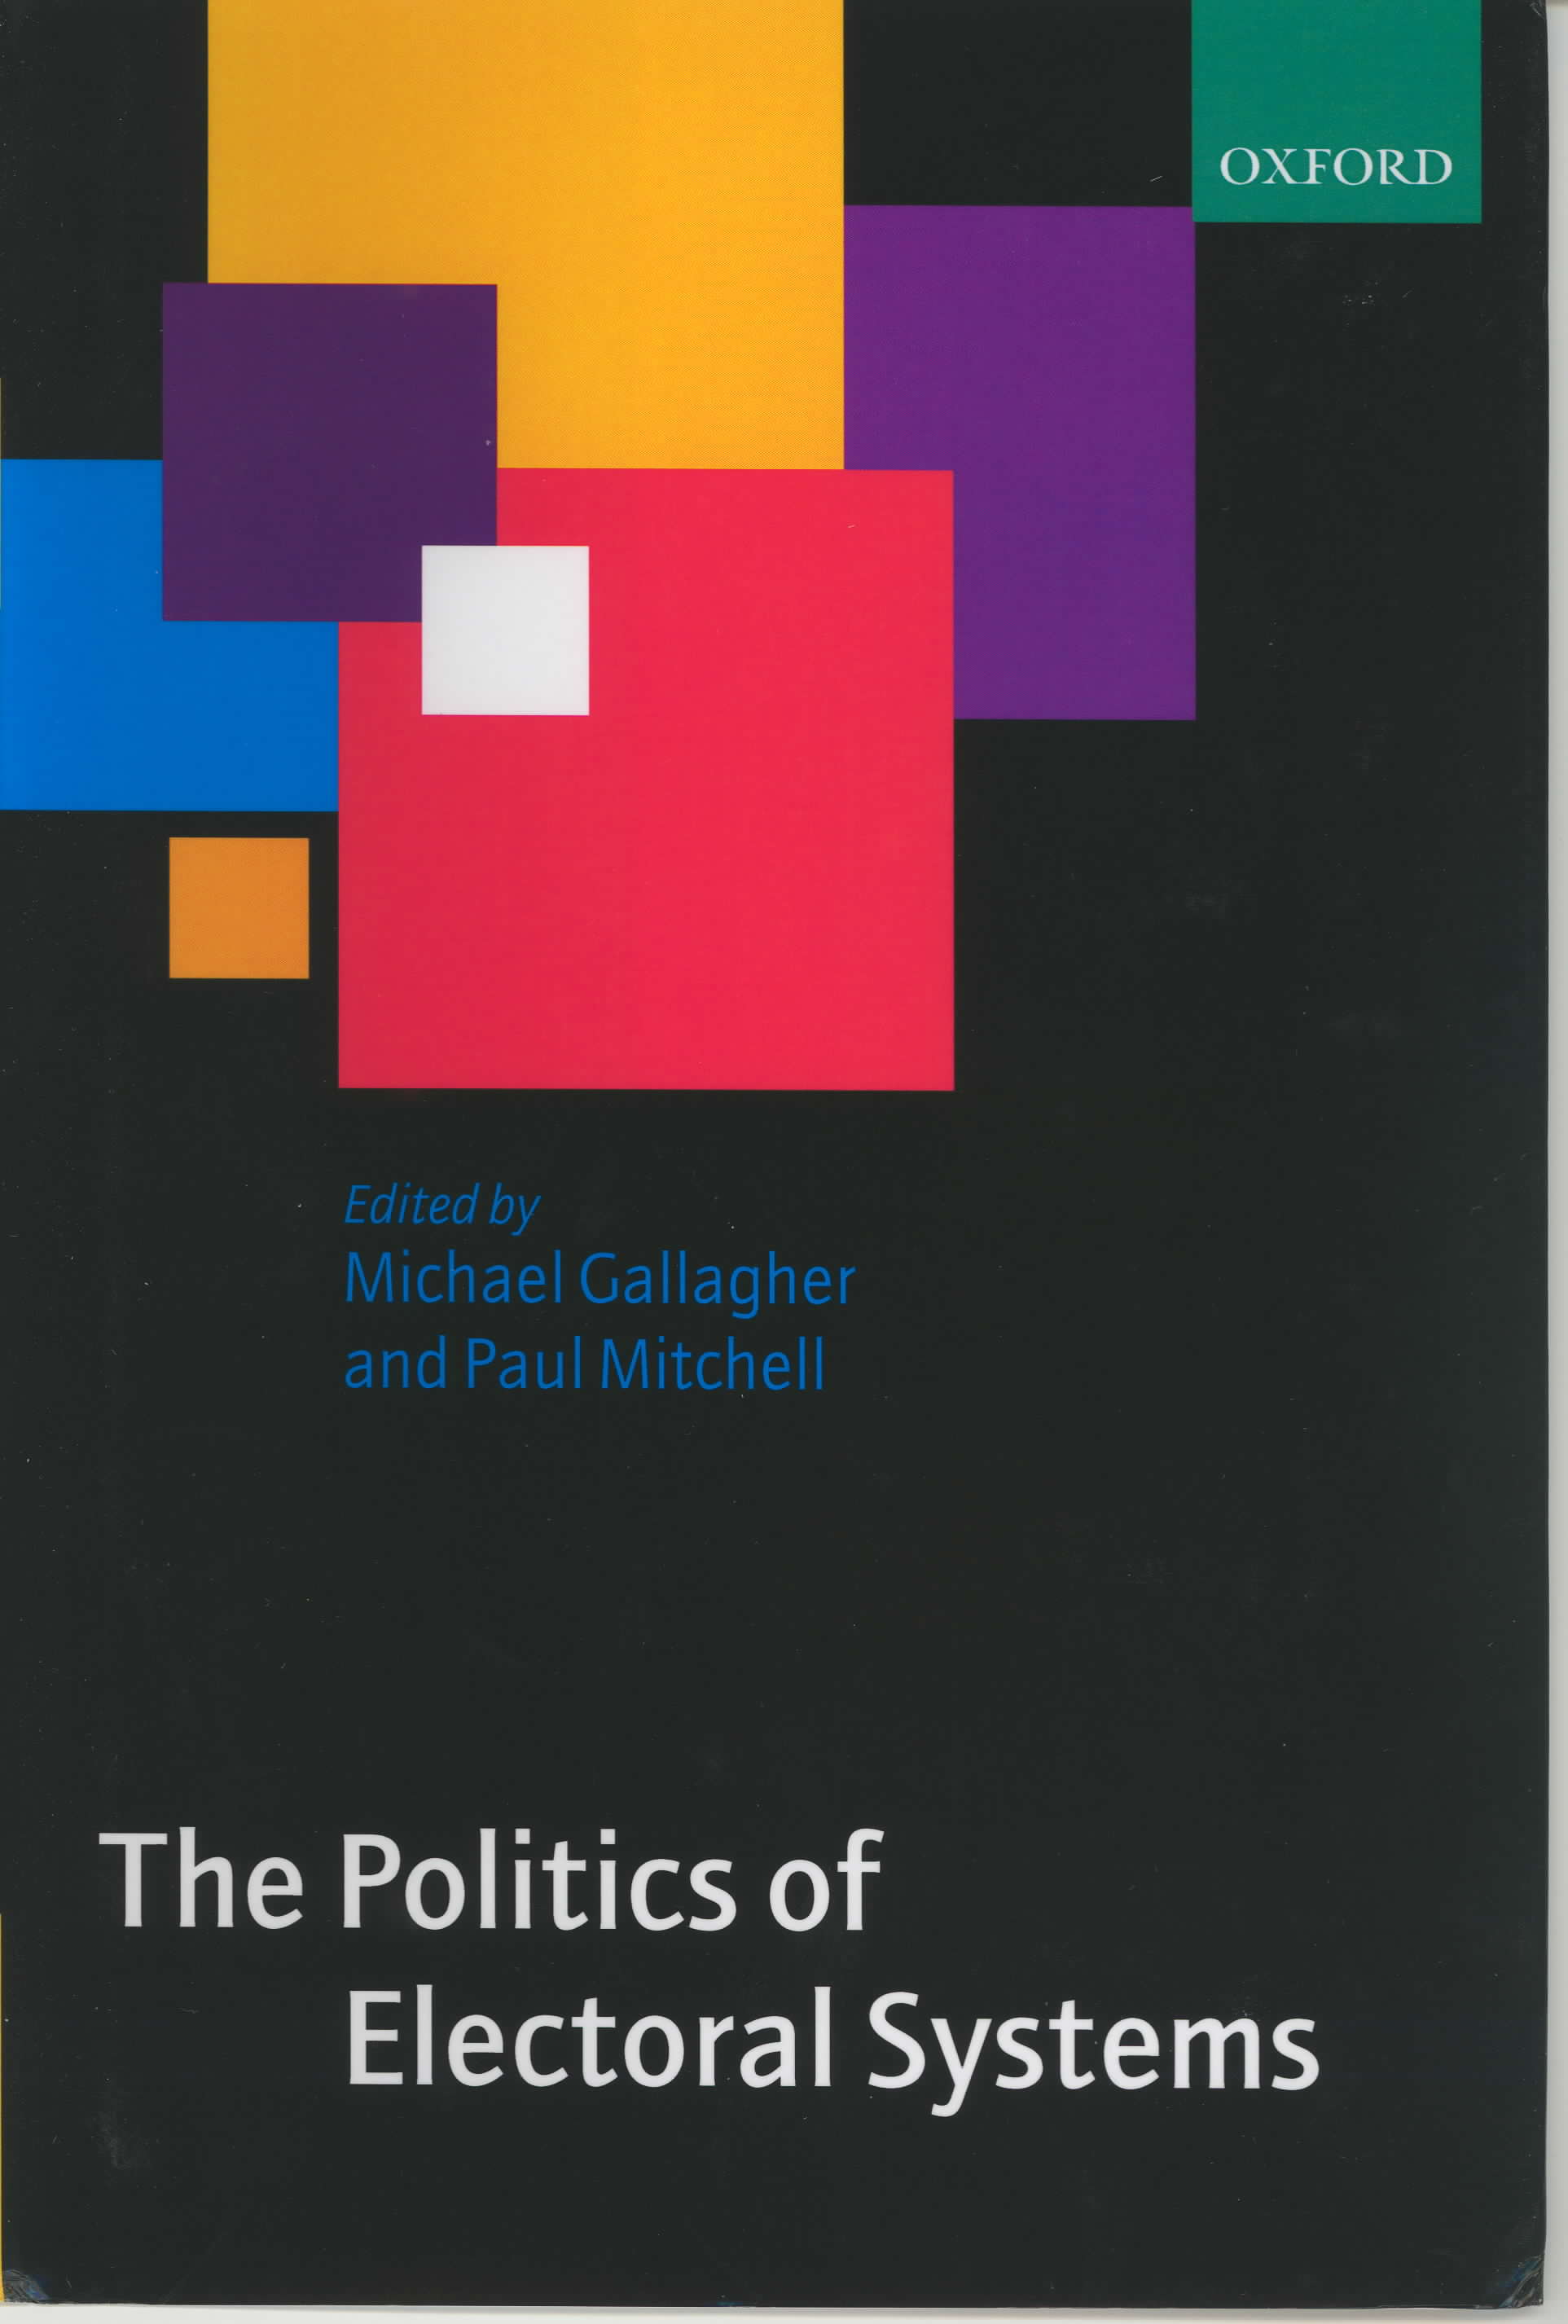 Cover of the book 'The Politics of Electoral Systems'